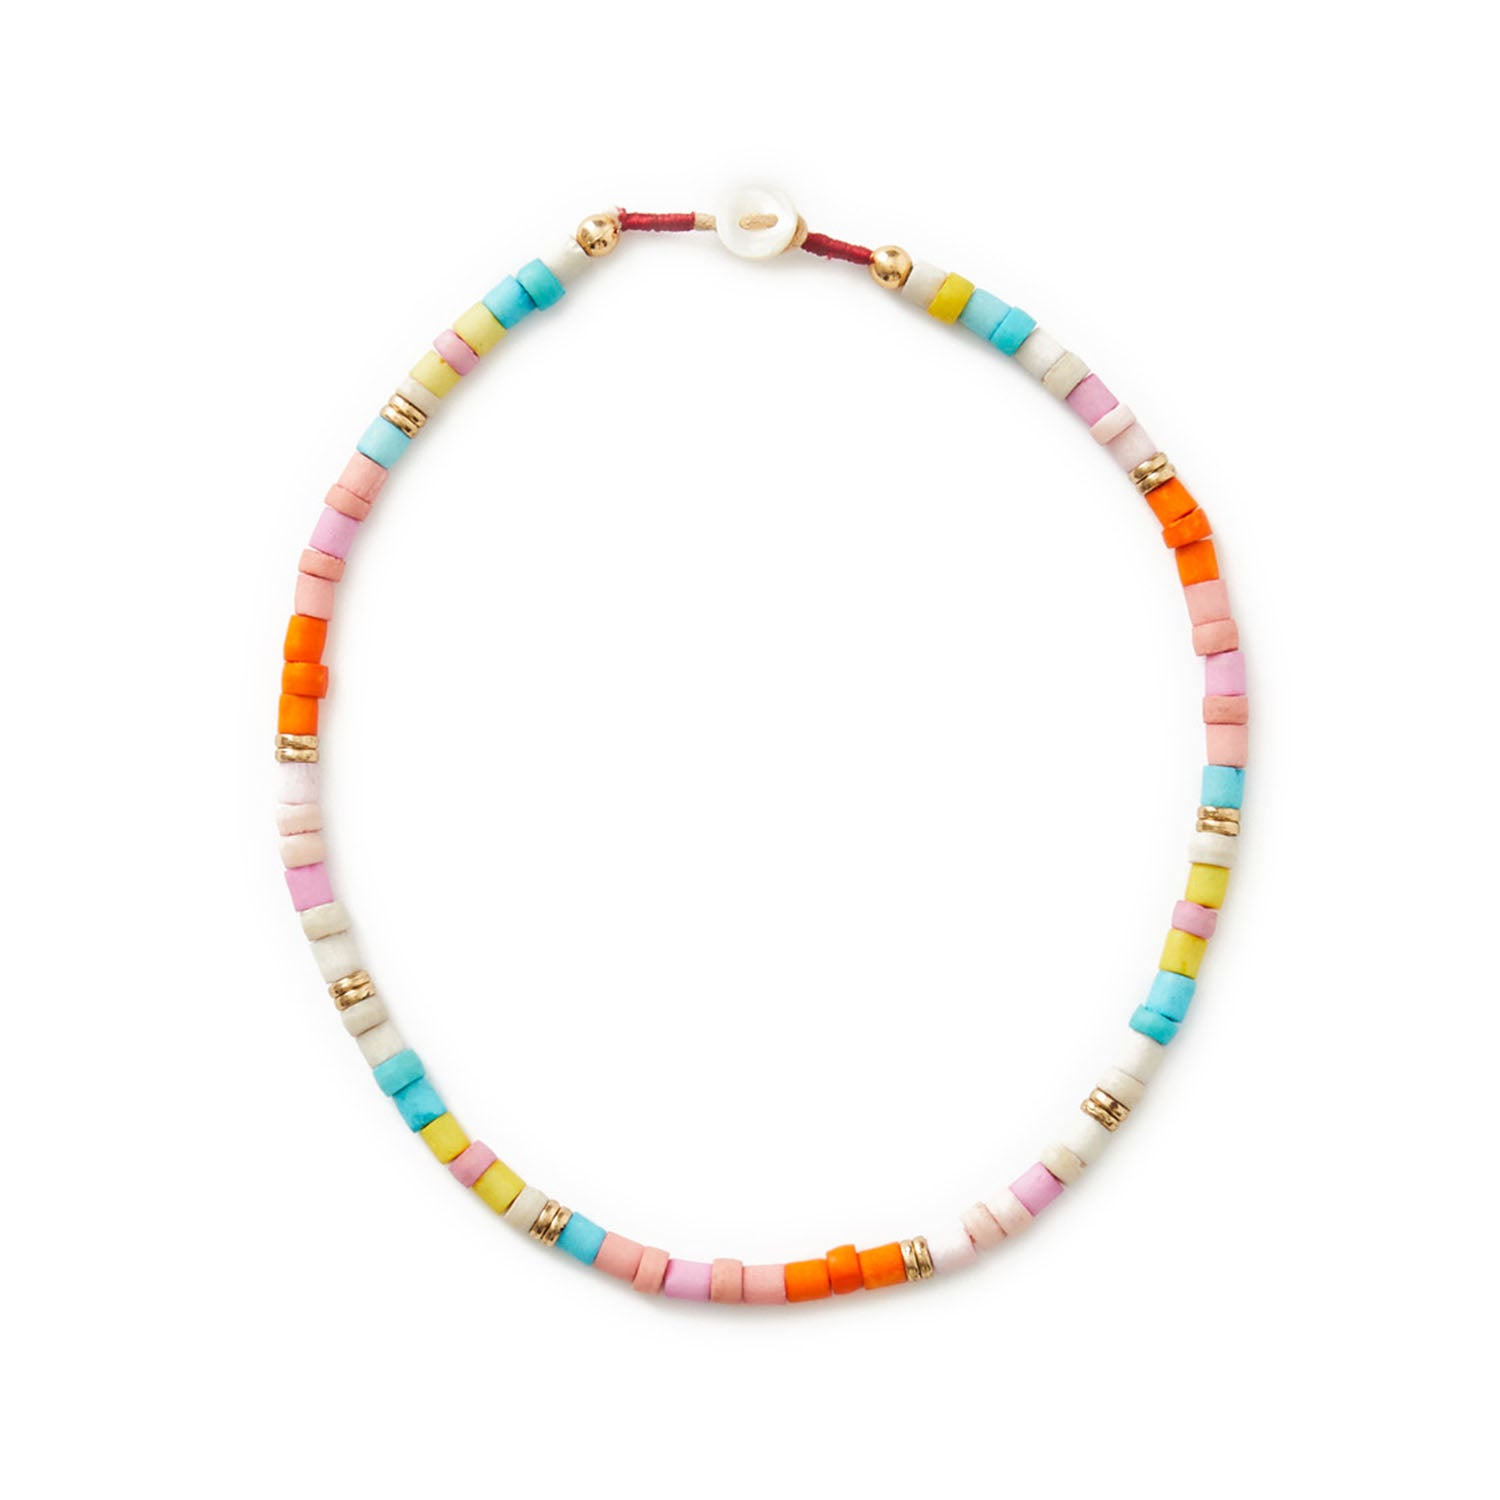 Multicolored beaded choker necklace